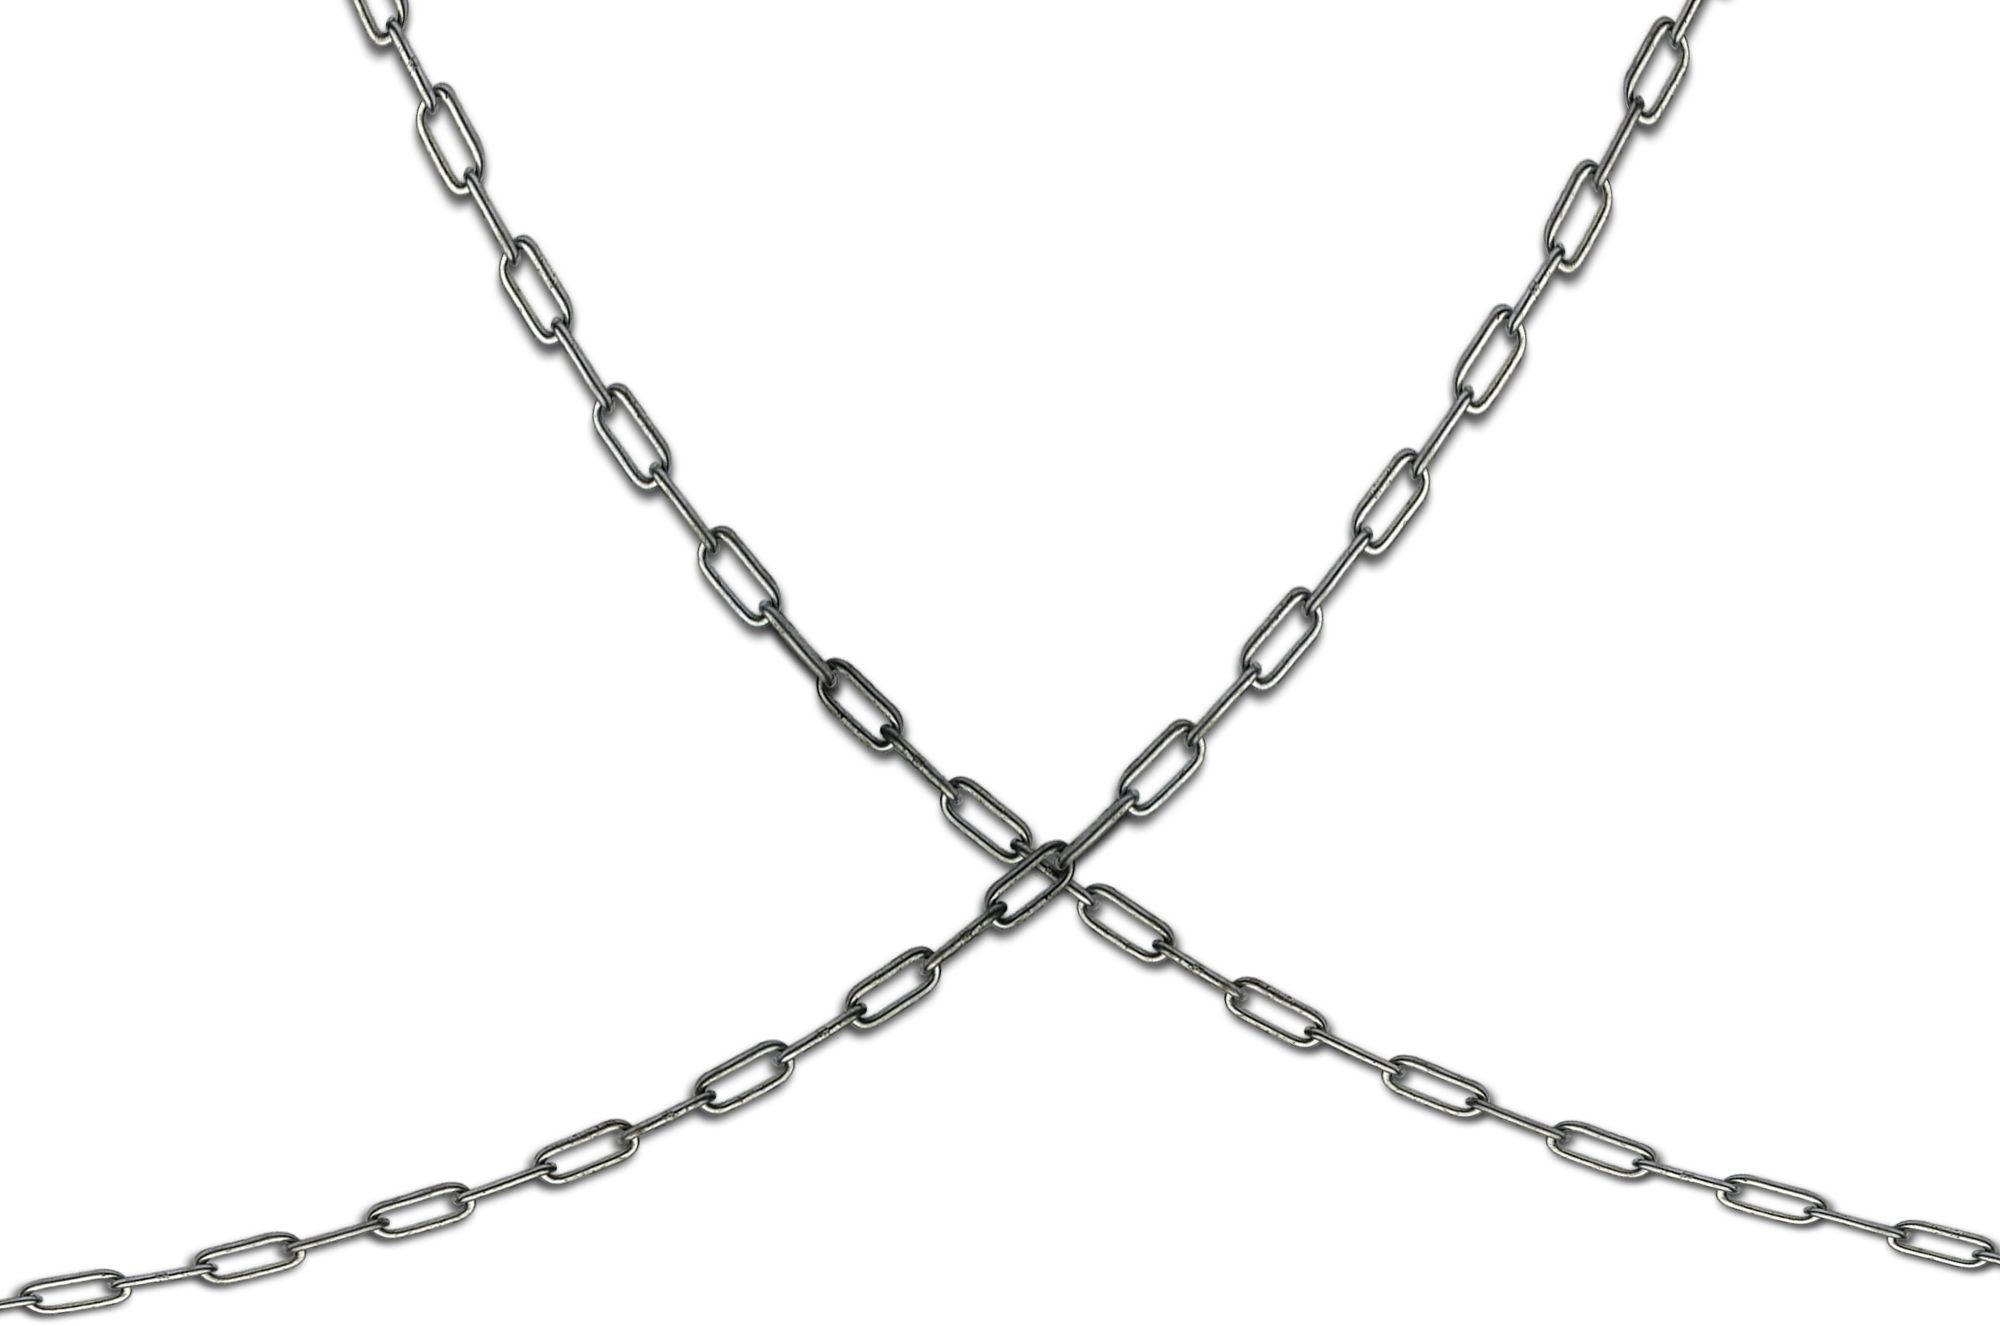 Free Broken Chains Png, Download Free Broken Chains Png png images ...